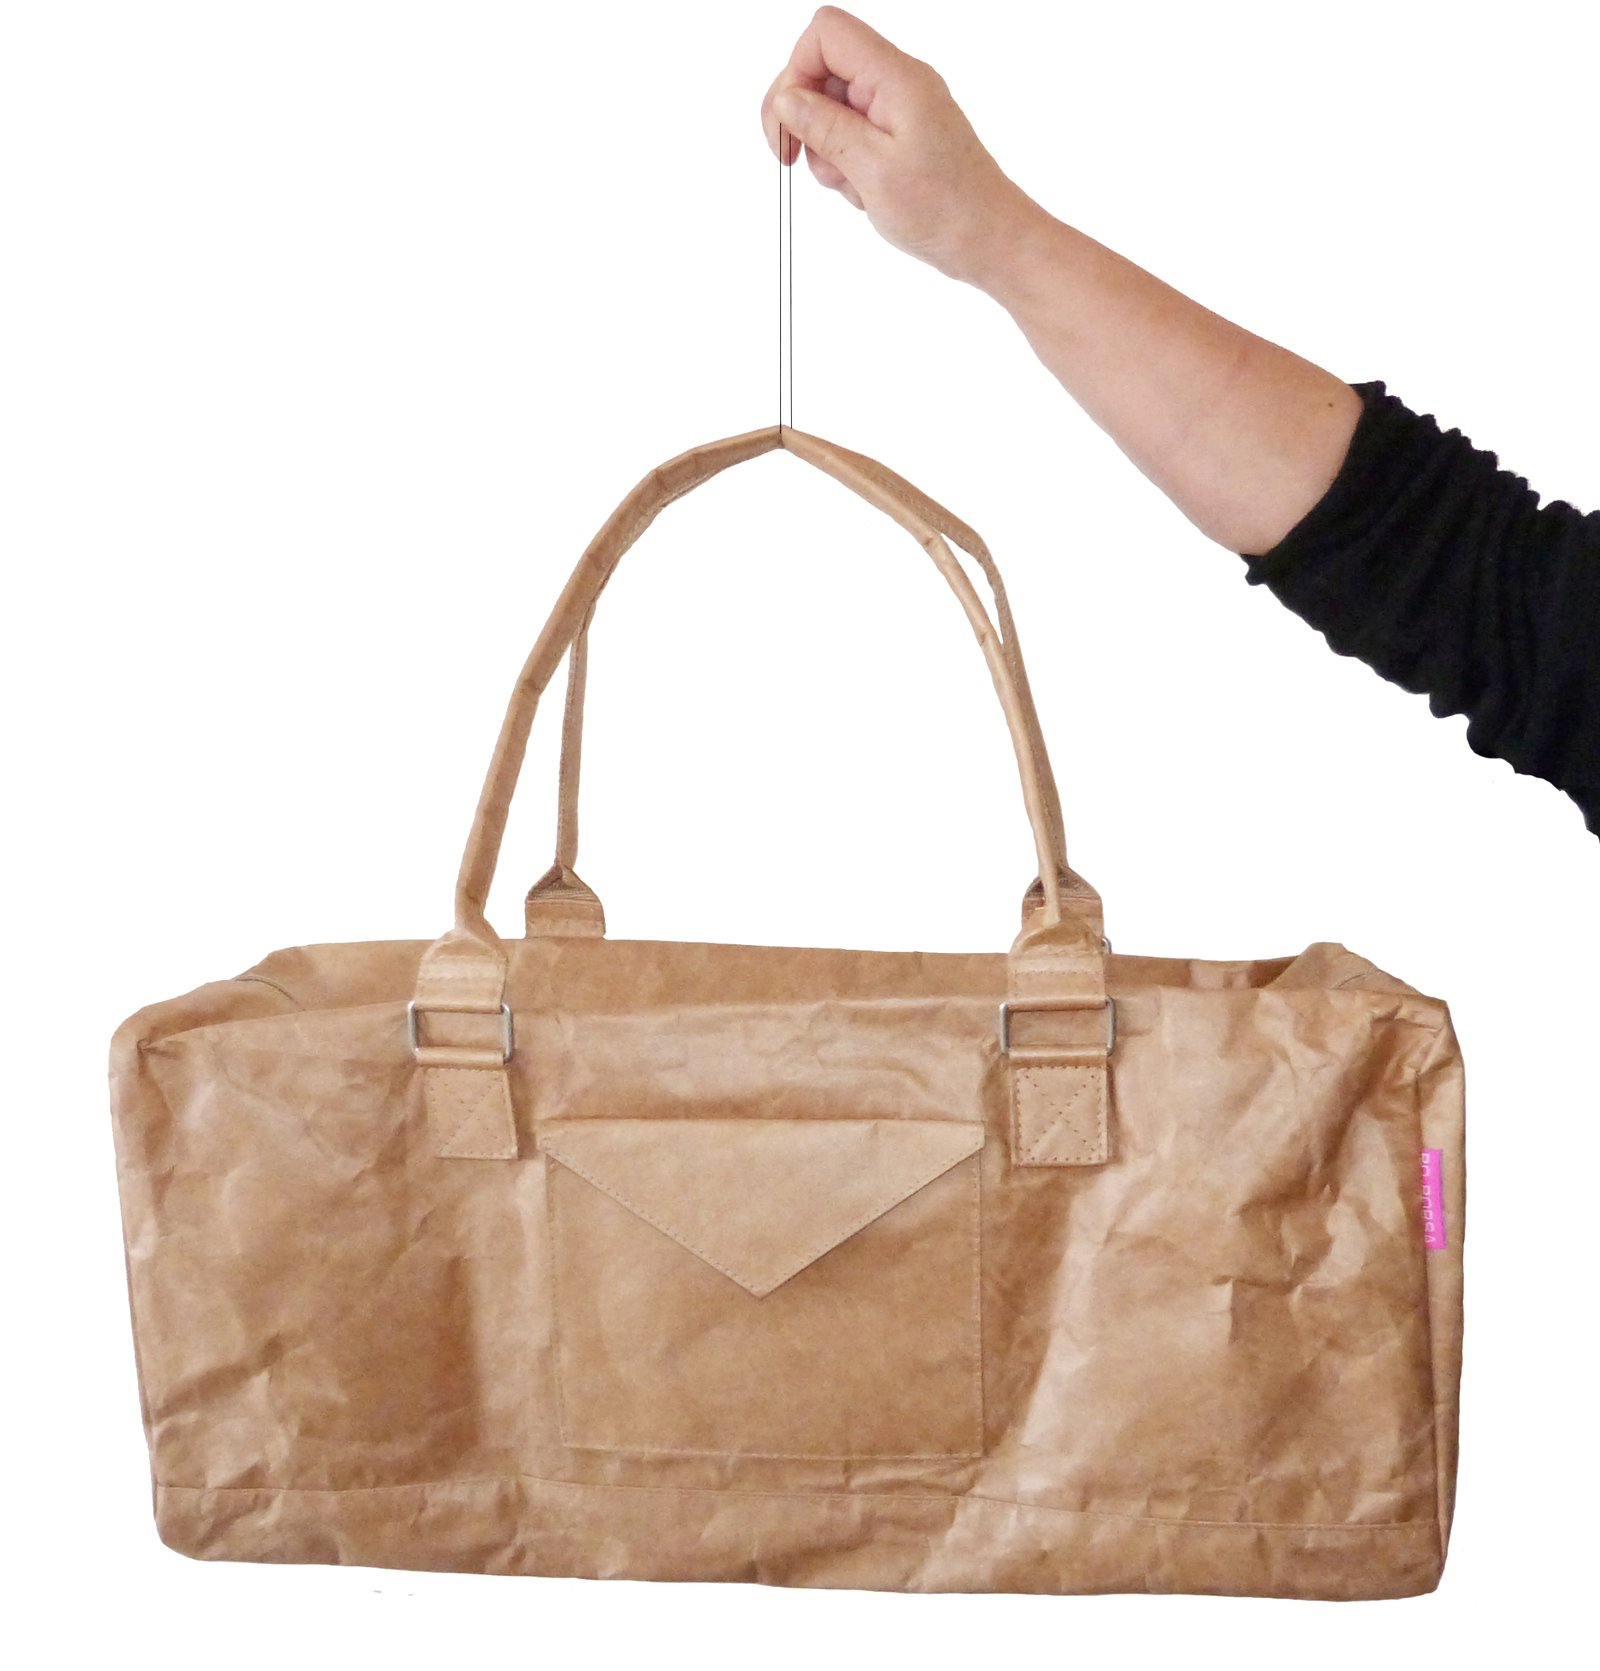 Bags and Accessories in Unique Offers, Borsa tote Tour Buddy Rosa